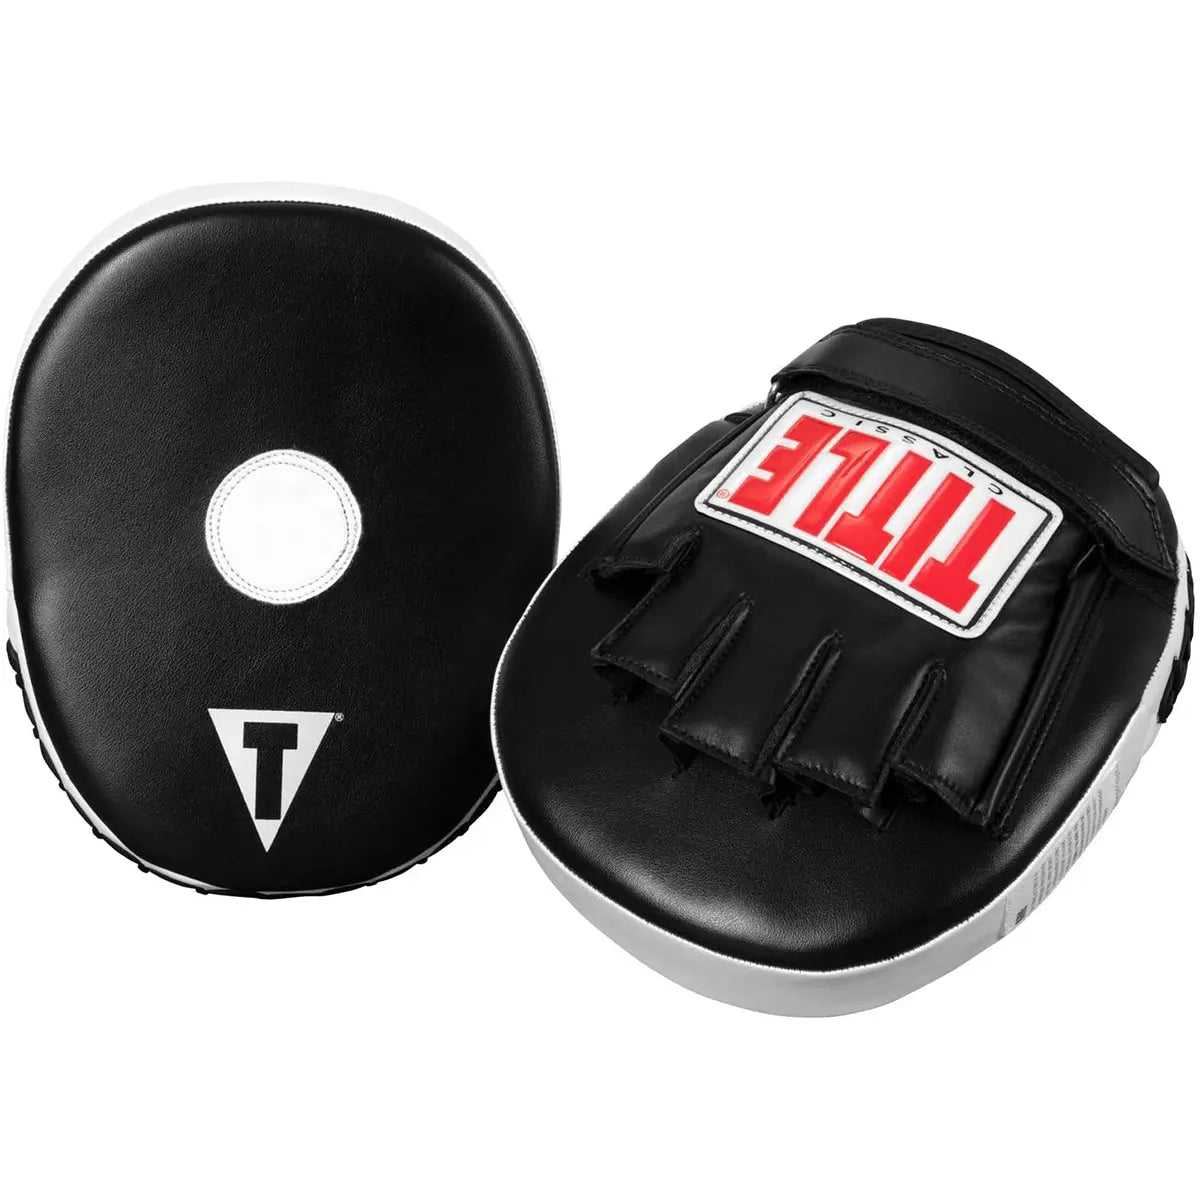 Title Boxing Classic Panther Micro Mitts 2.0 - Black Title Boxing